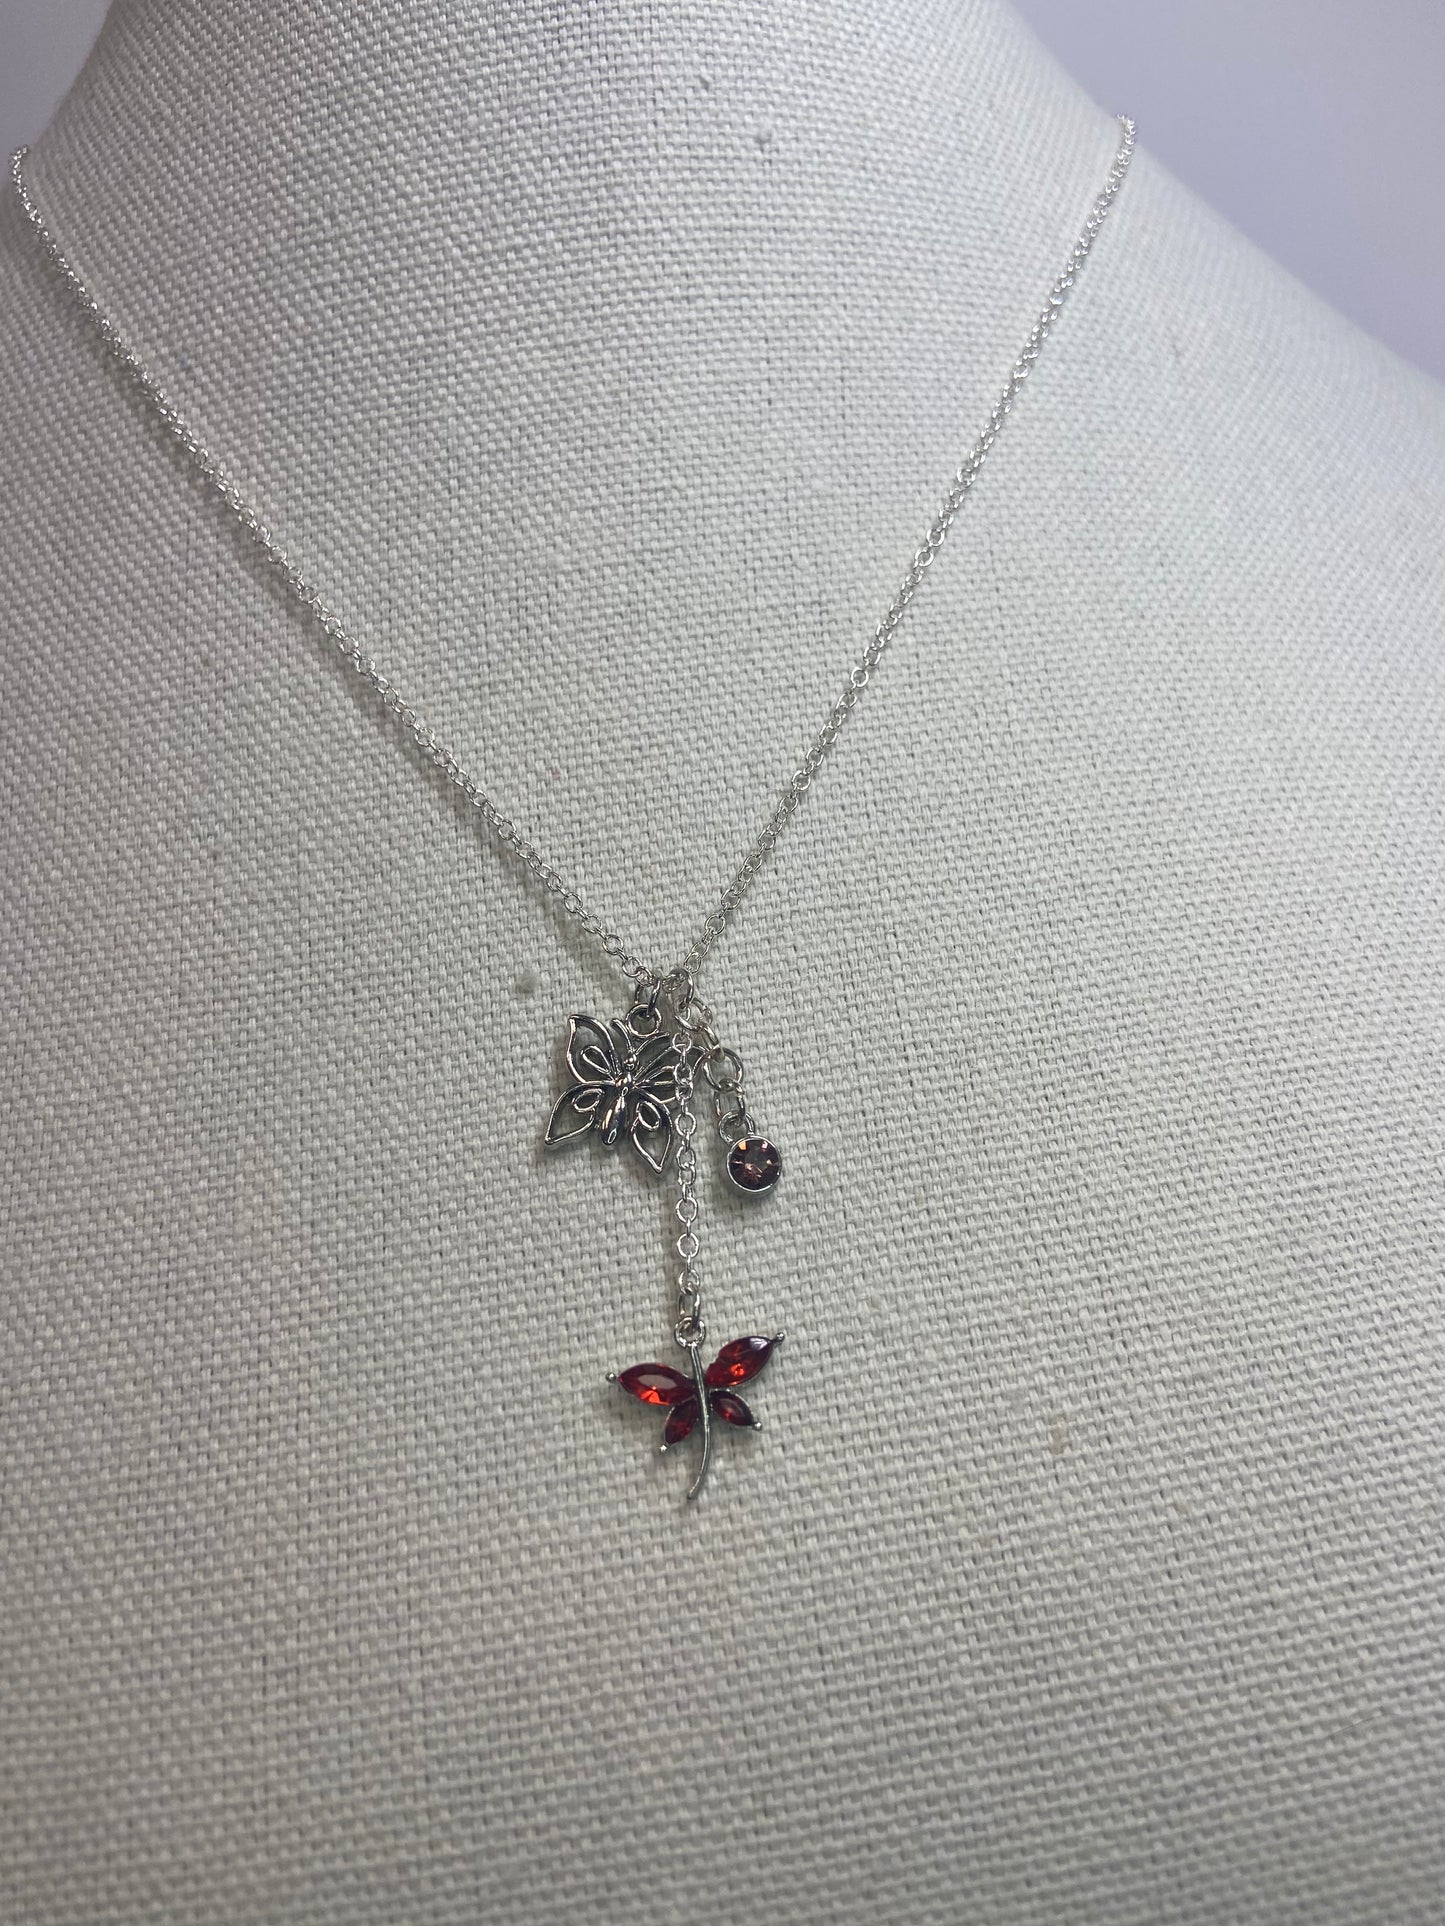 Necklace butterfly dragonfly charm